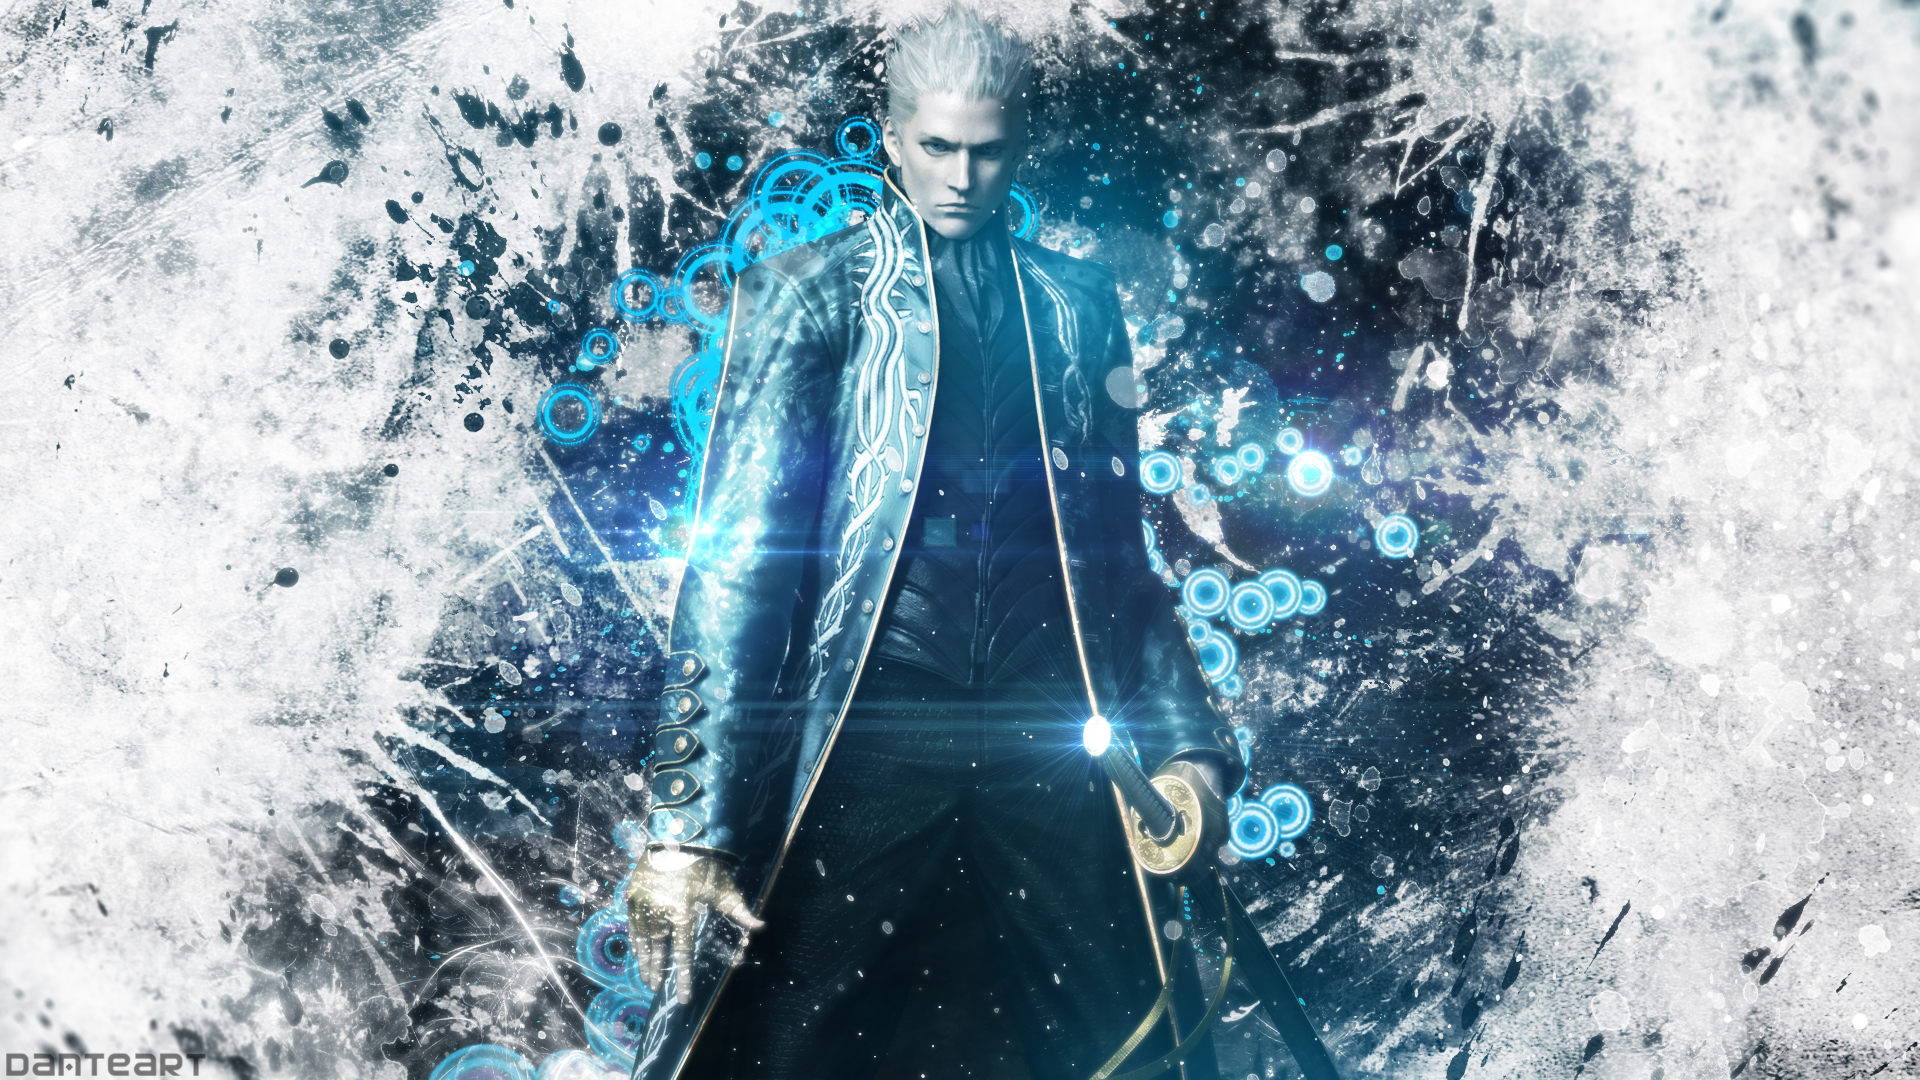 Devil May Cry 3 Vergil Wallpaper by DanteArtWallpapers on